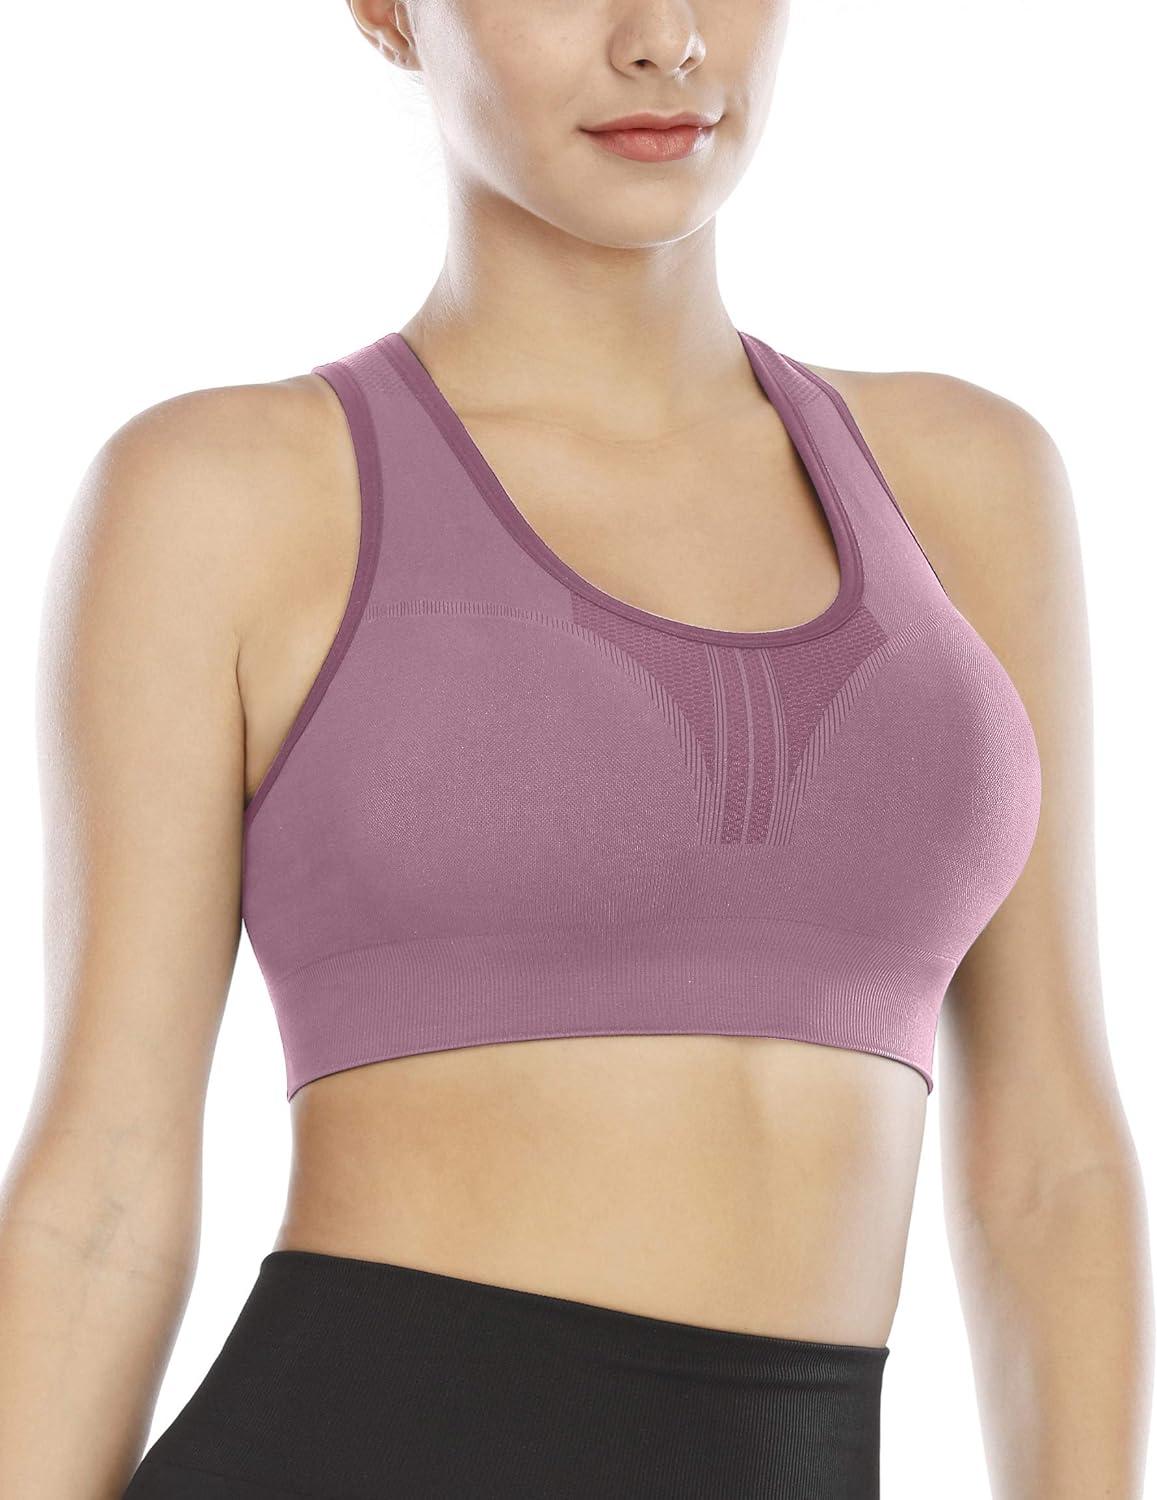 Heathyoga High Impact Sports Bras for Women Padded Sports Bras for